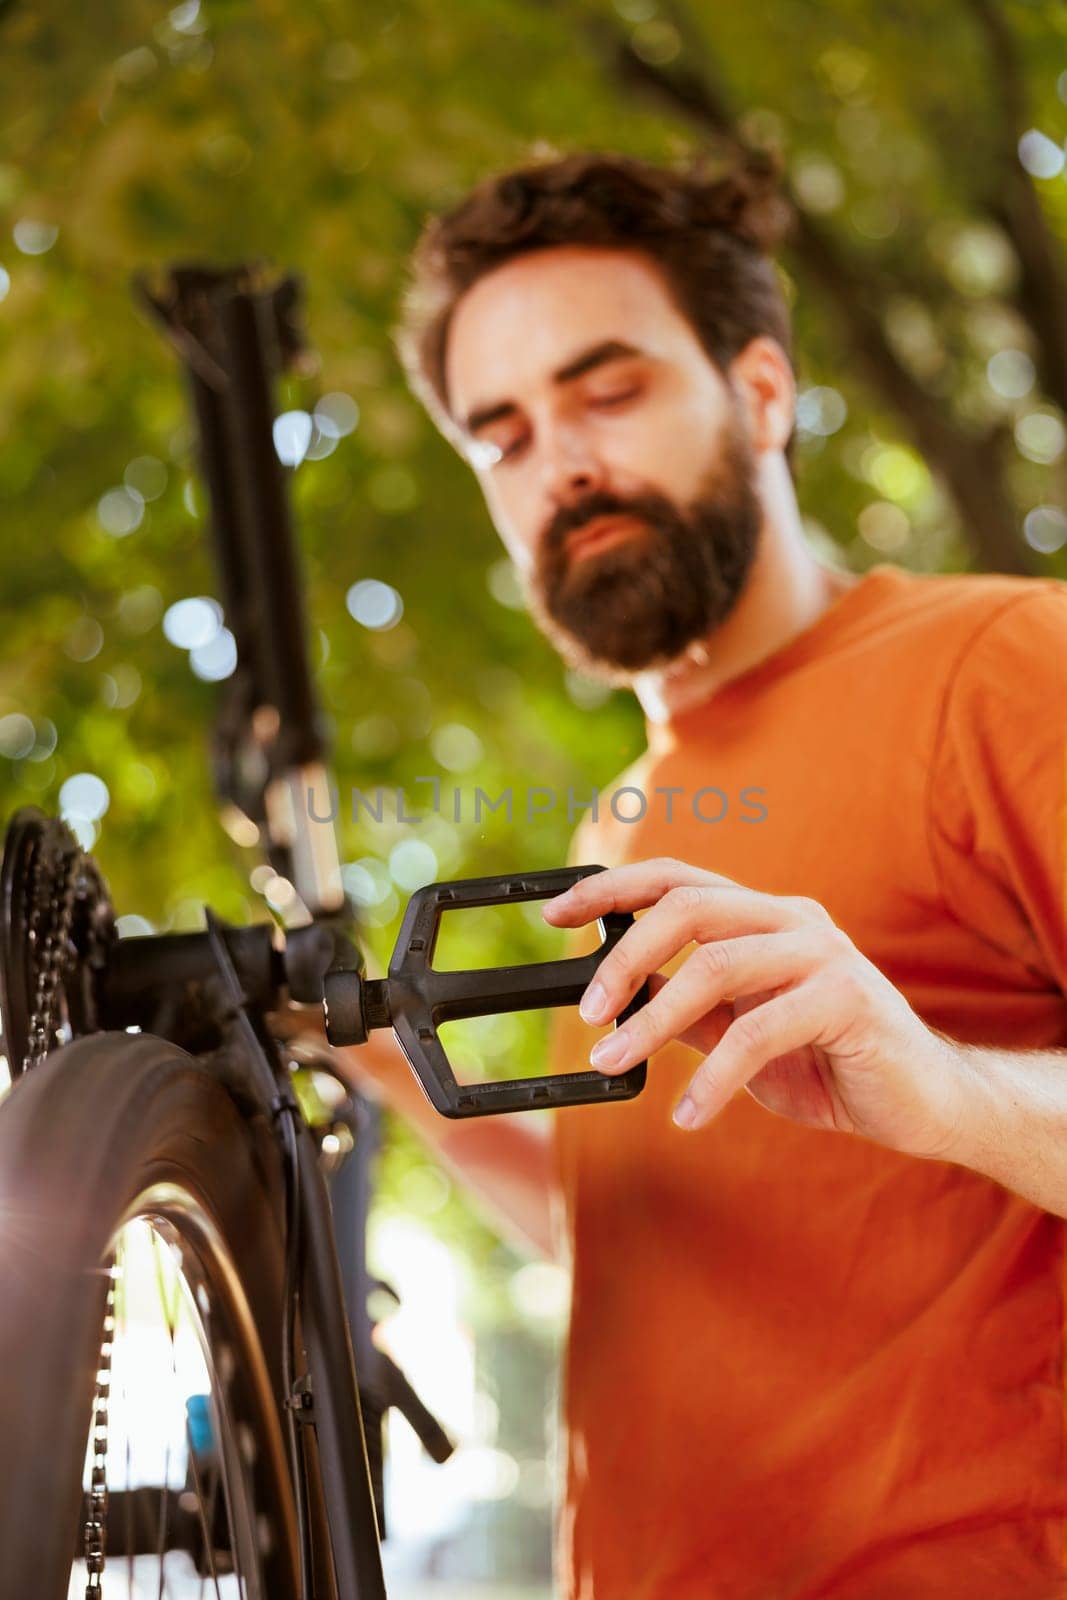 Sports-loving dedicated man repairing bicycle parts using professional tools in home yard. Healthy caucasian male cyclist assessing and mending damaged bicycle as summer activity.